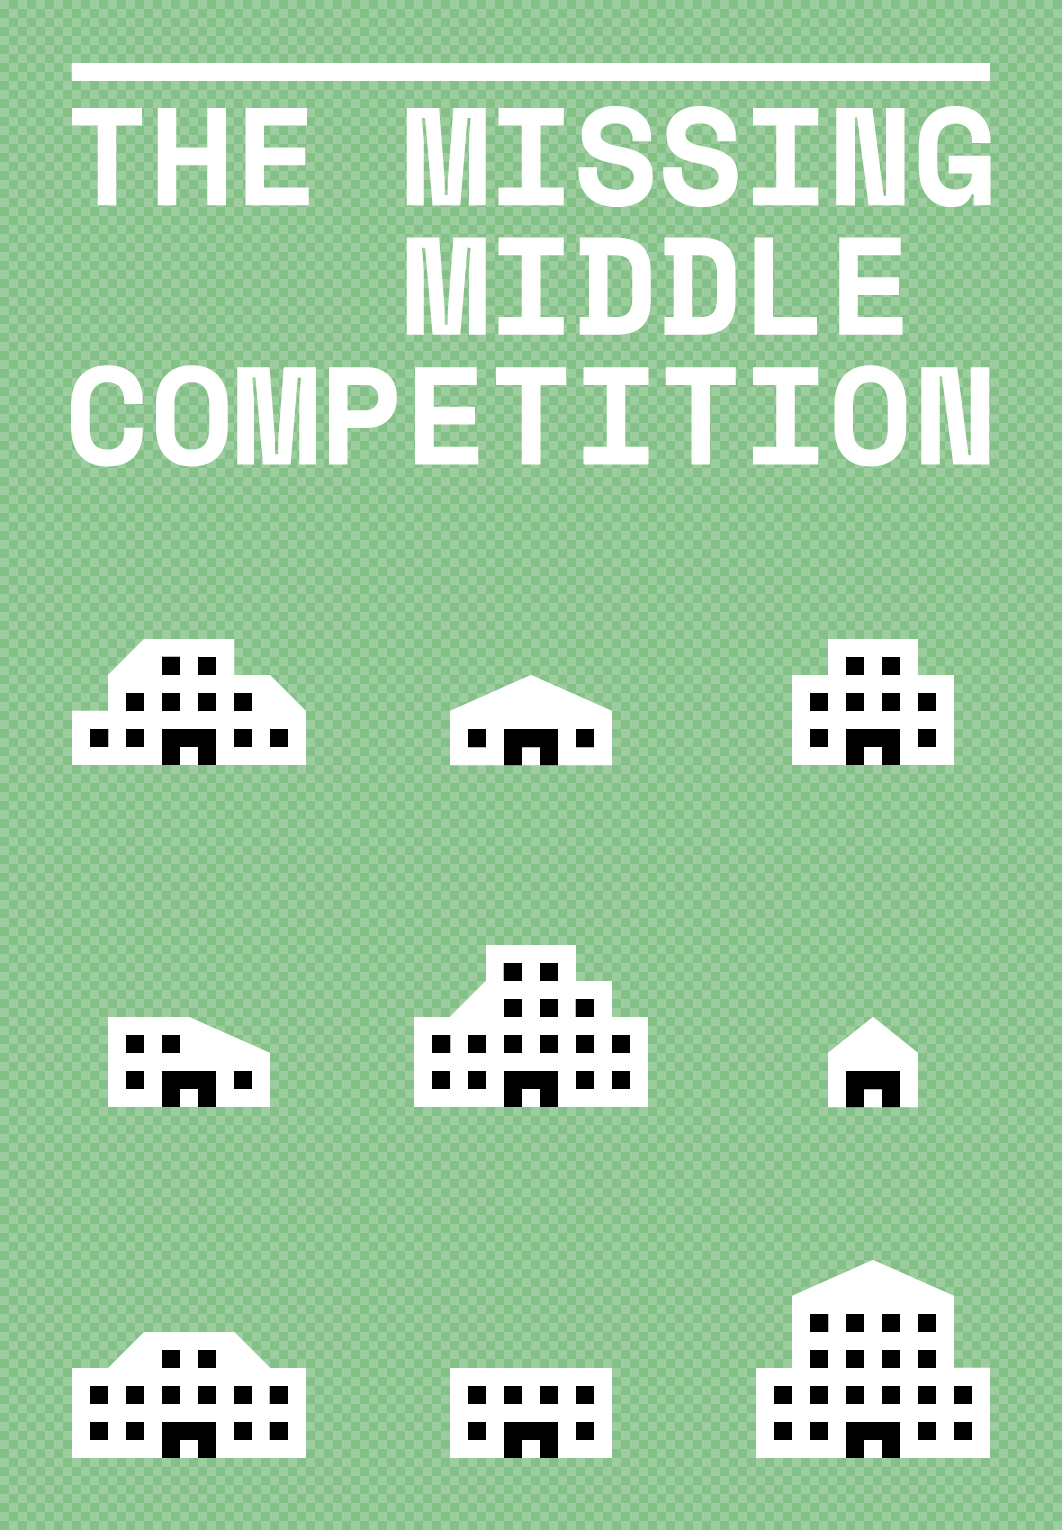 The missing middle competition